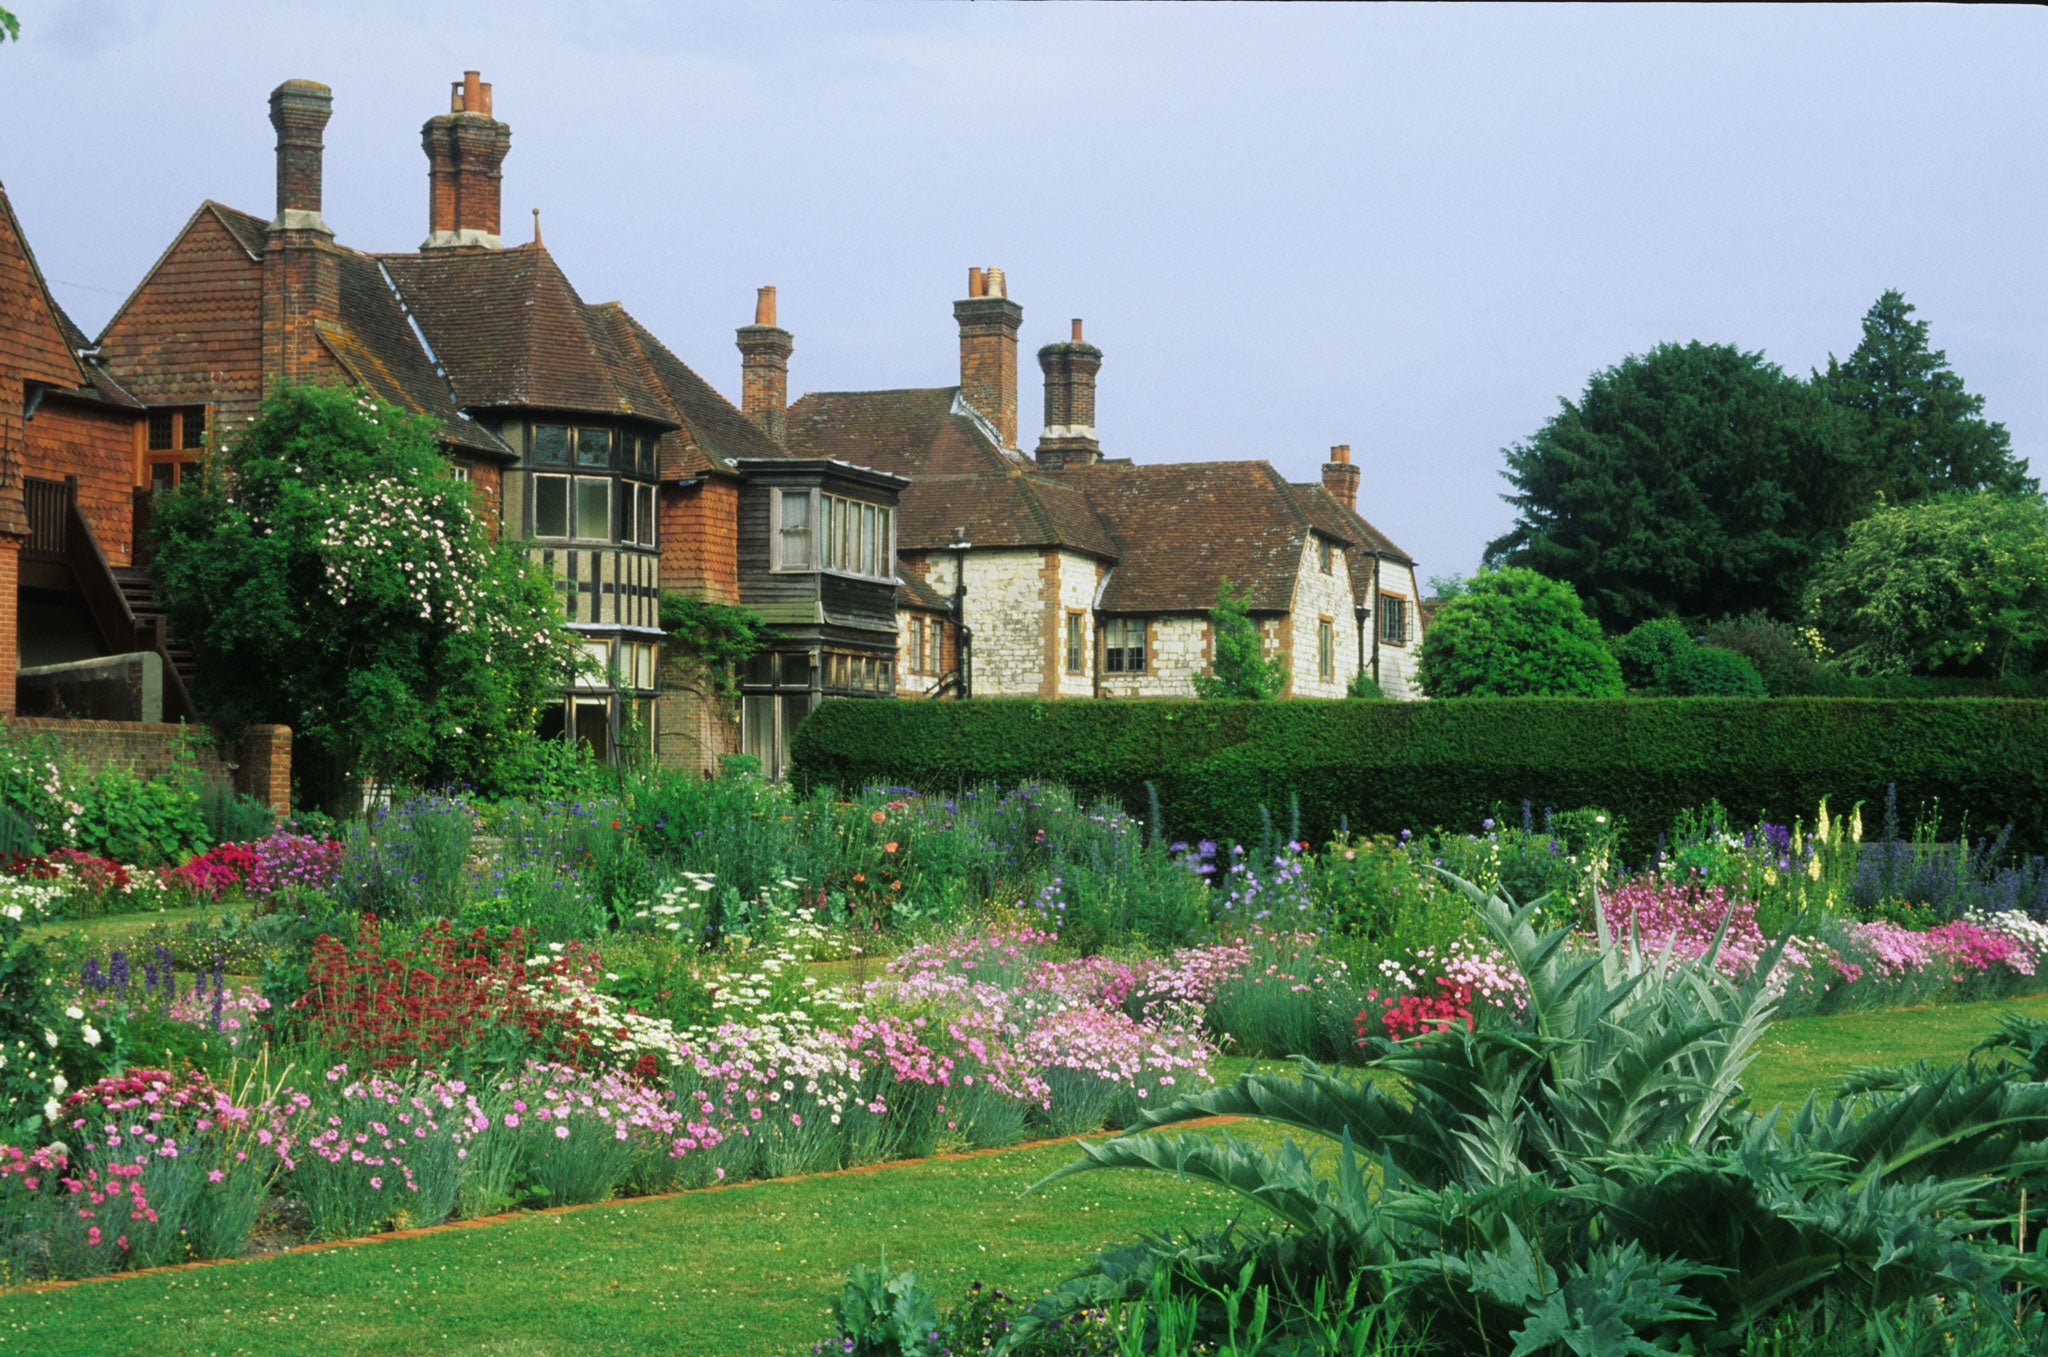 Selborne is one of Hampshire's very prettiest villages